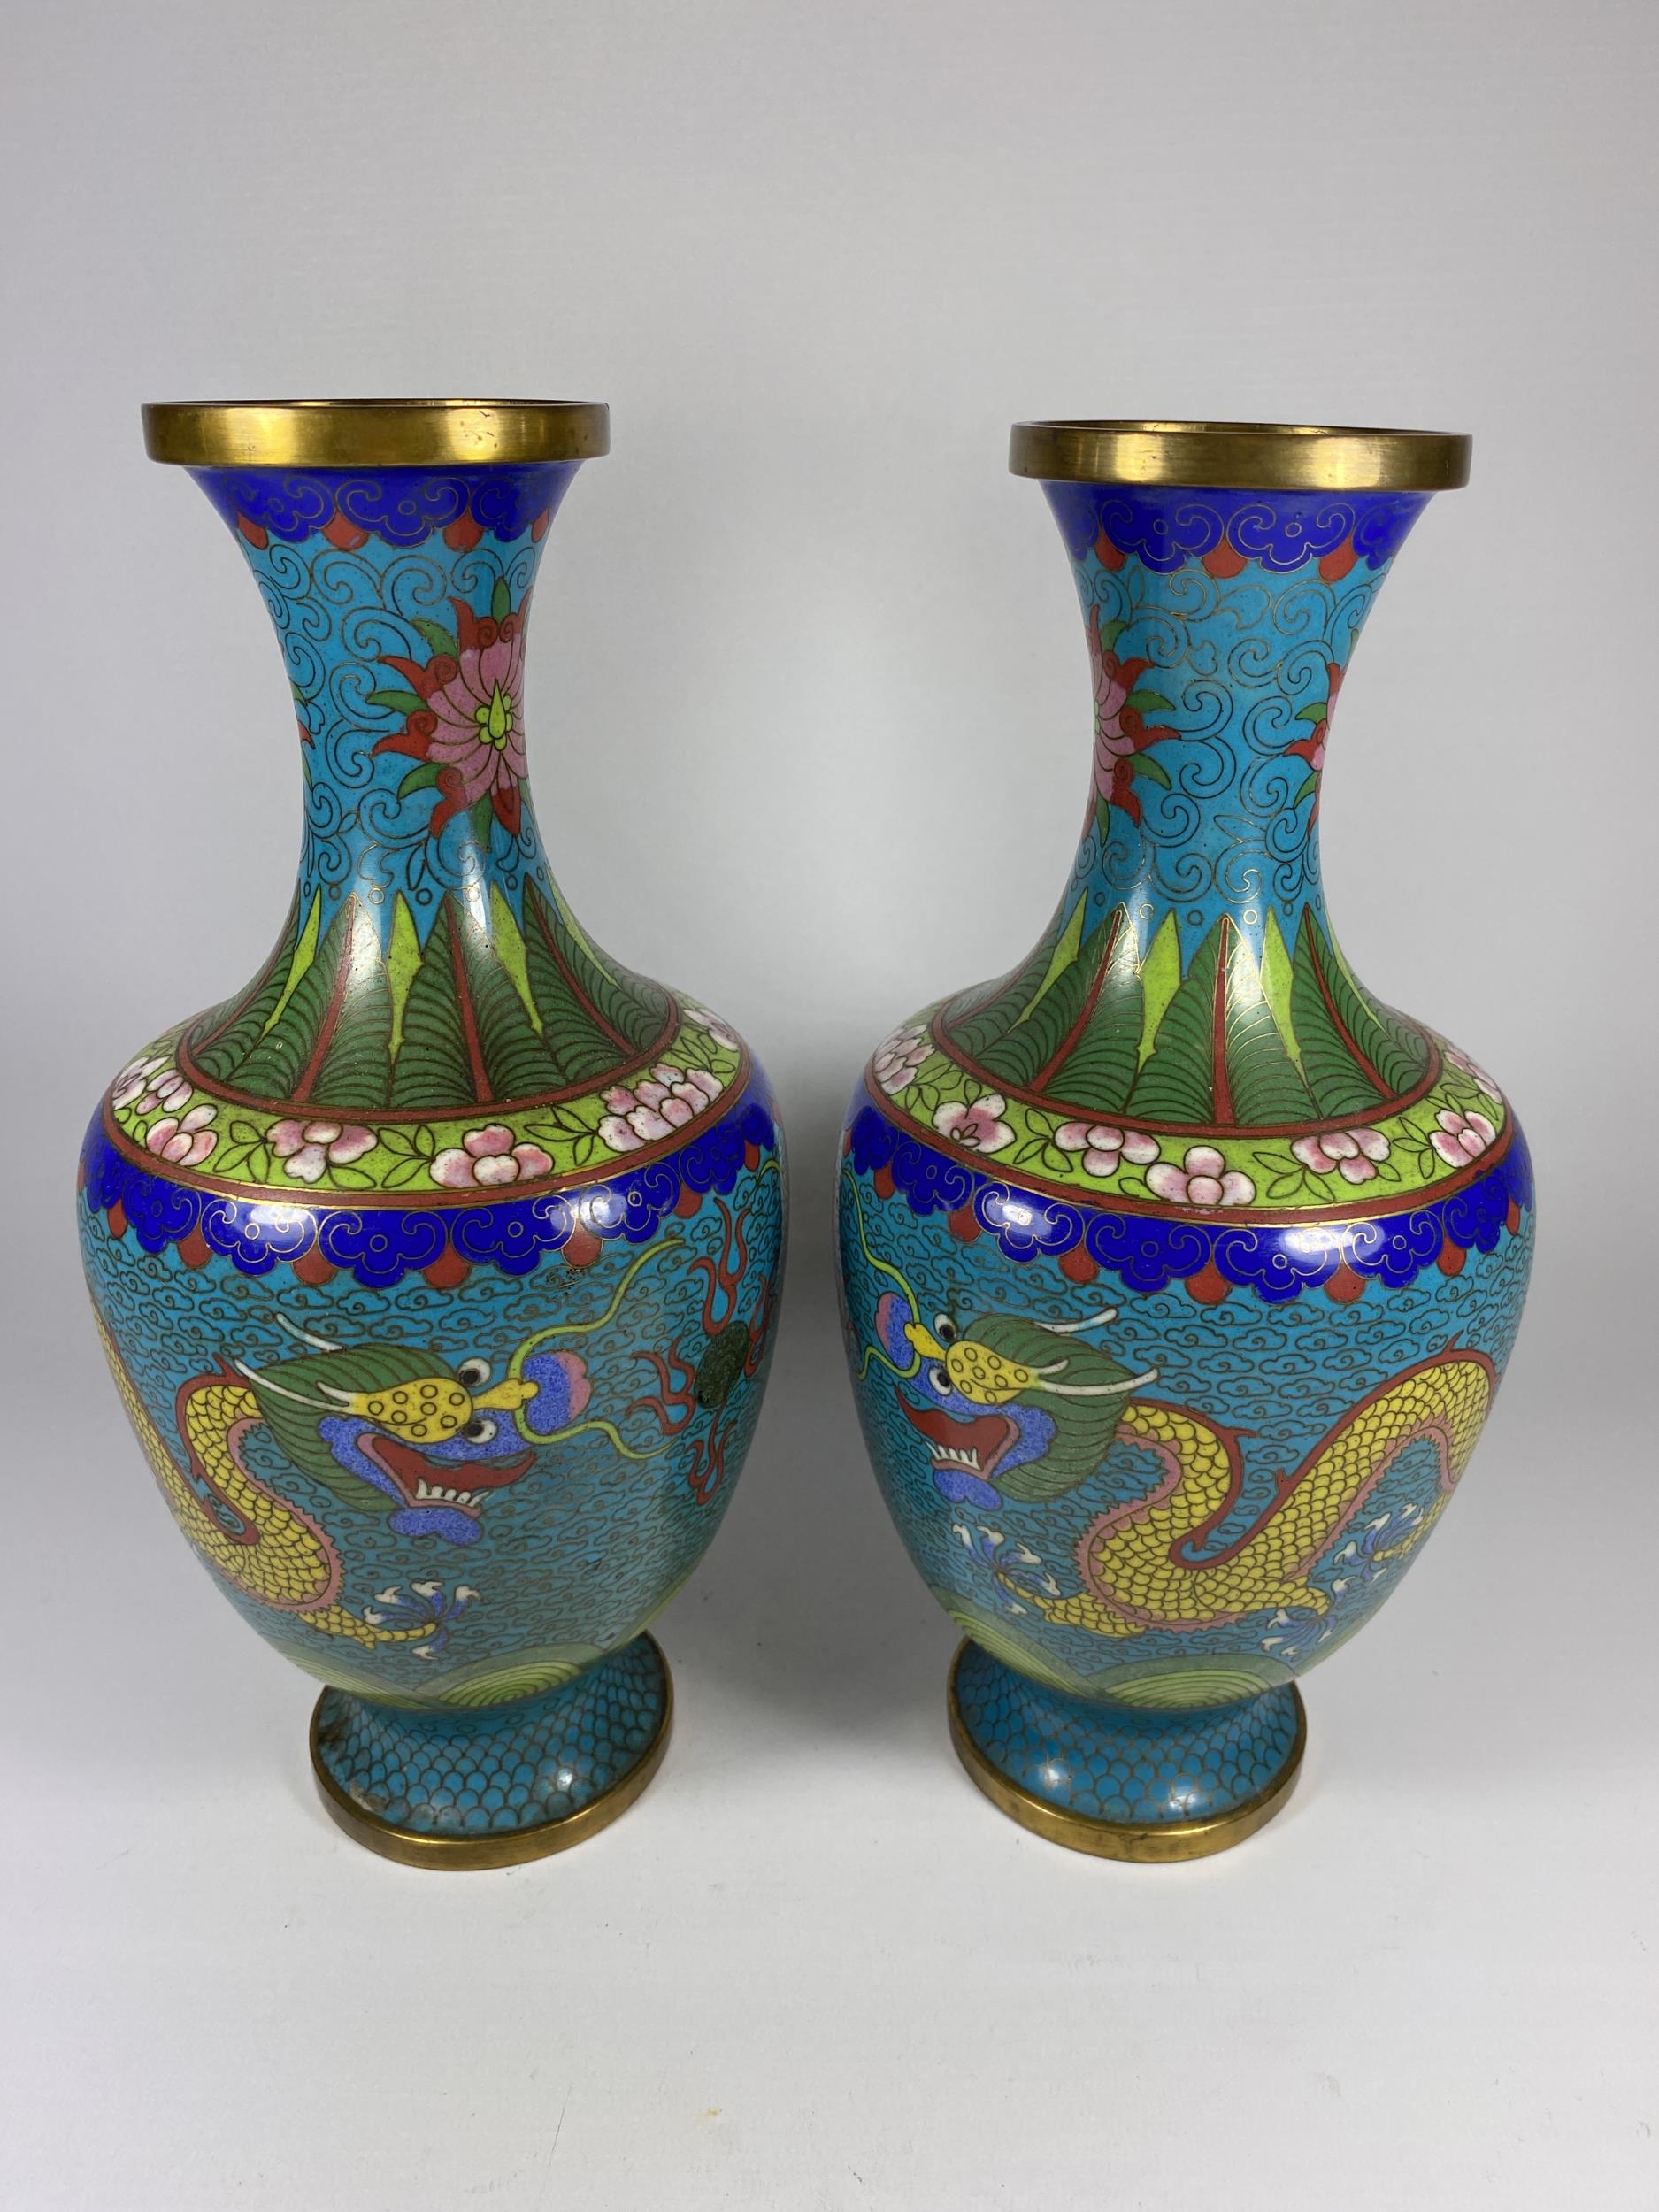 A PAIR OF CHINESE CLOISONNE BALUSTER FORM VASES WITH FIVE CLAW DRAGON CHASING THE FLAMING PEARL